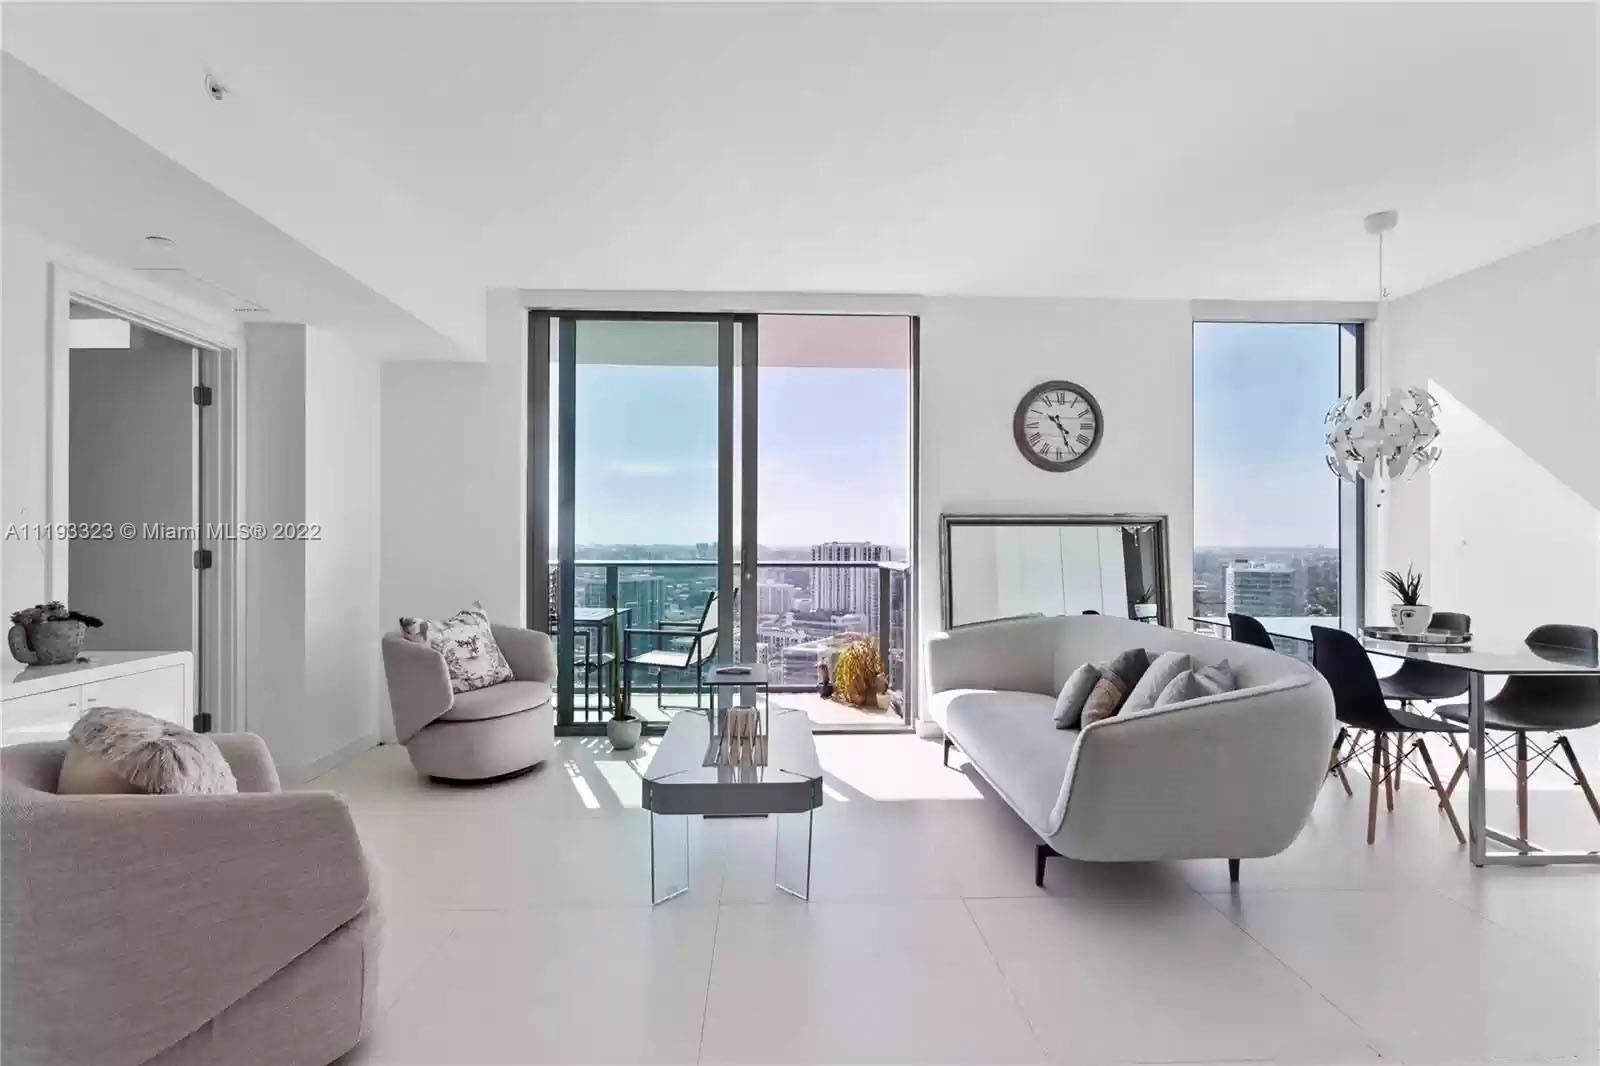 Stunning views of the city skyline and water from this high floor unit.  This residence features hur